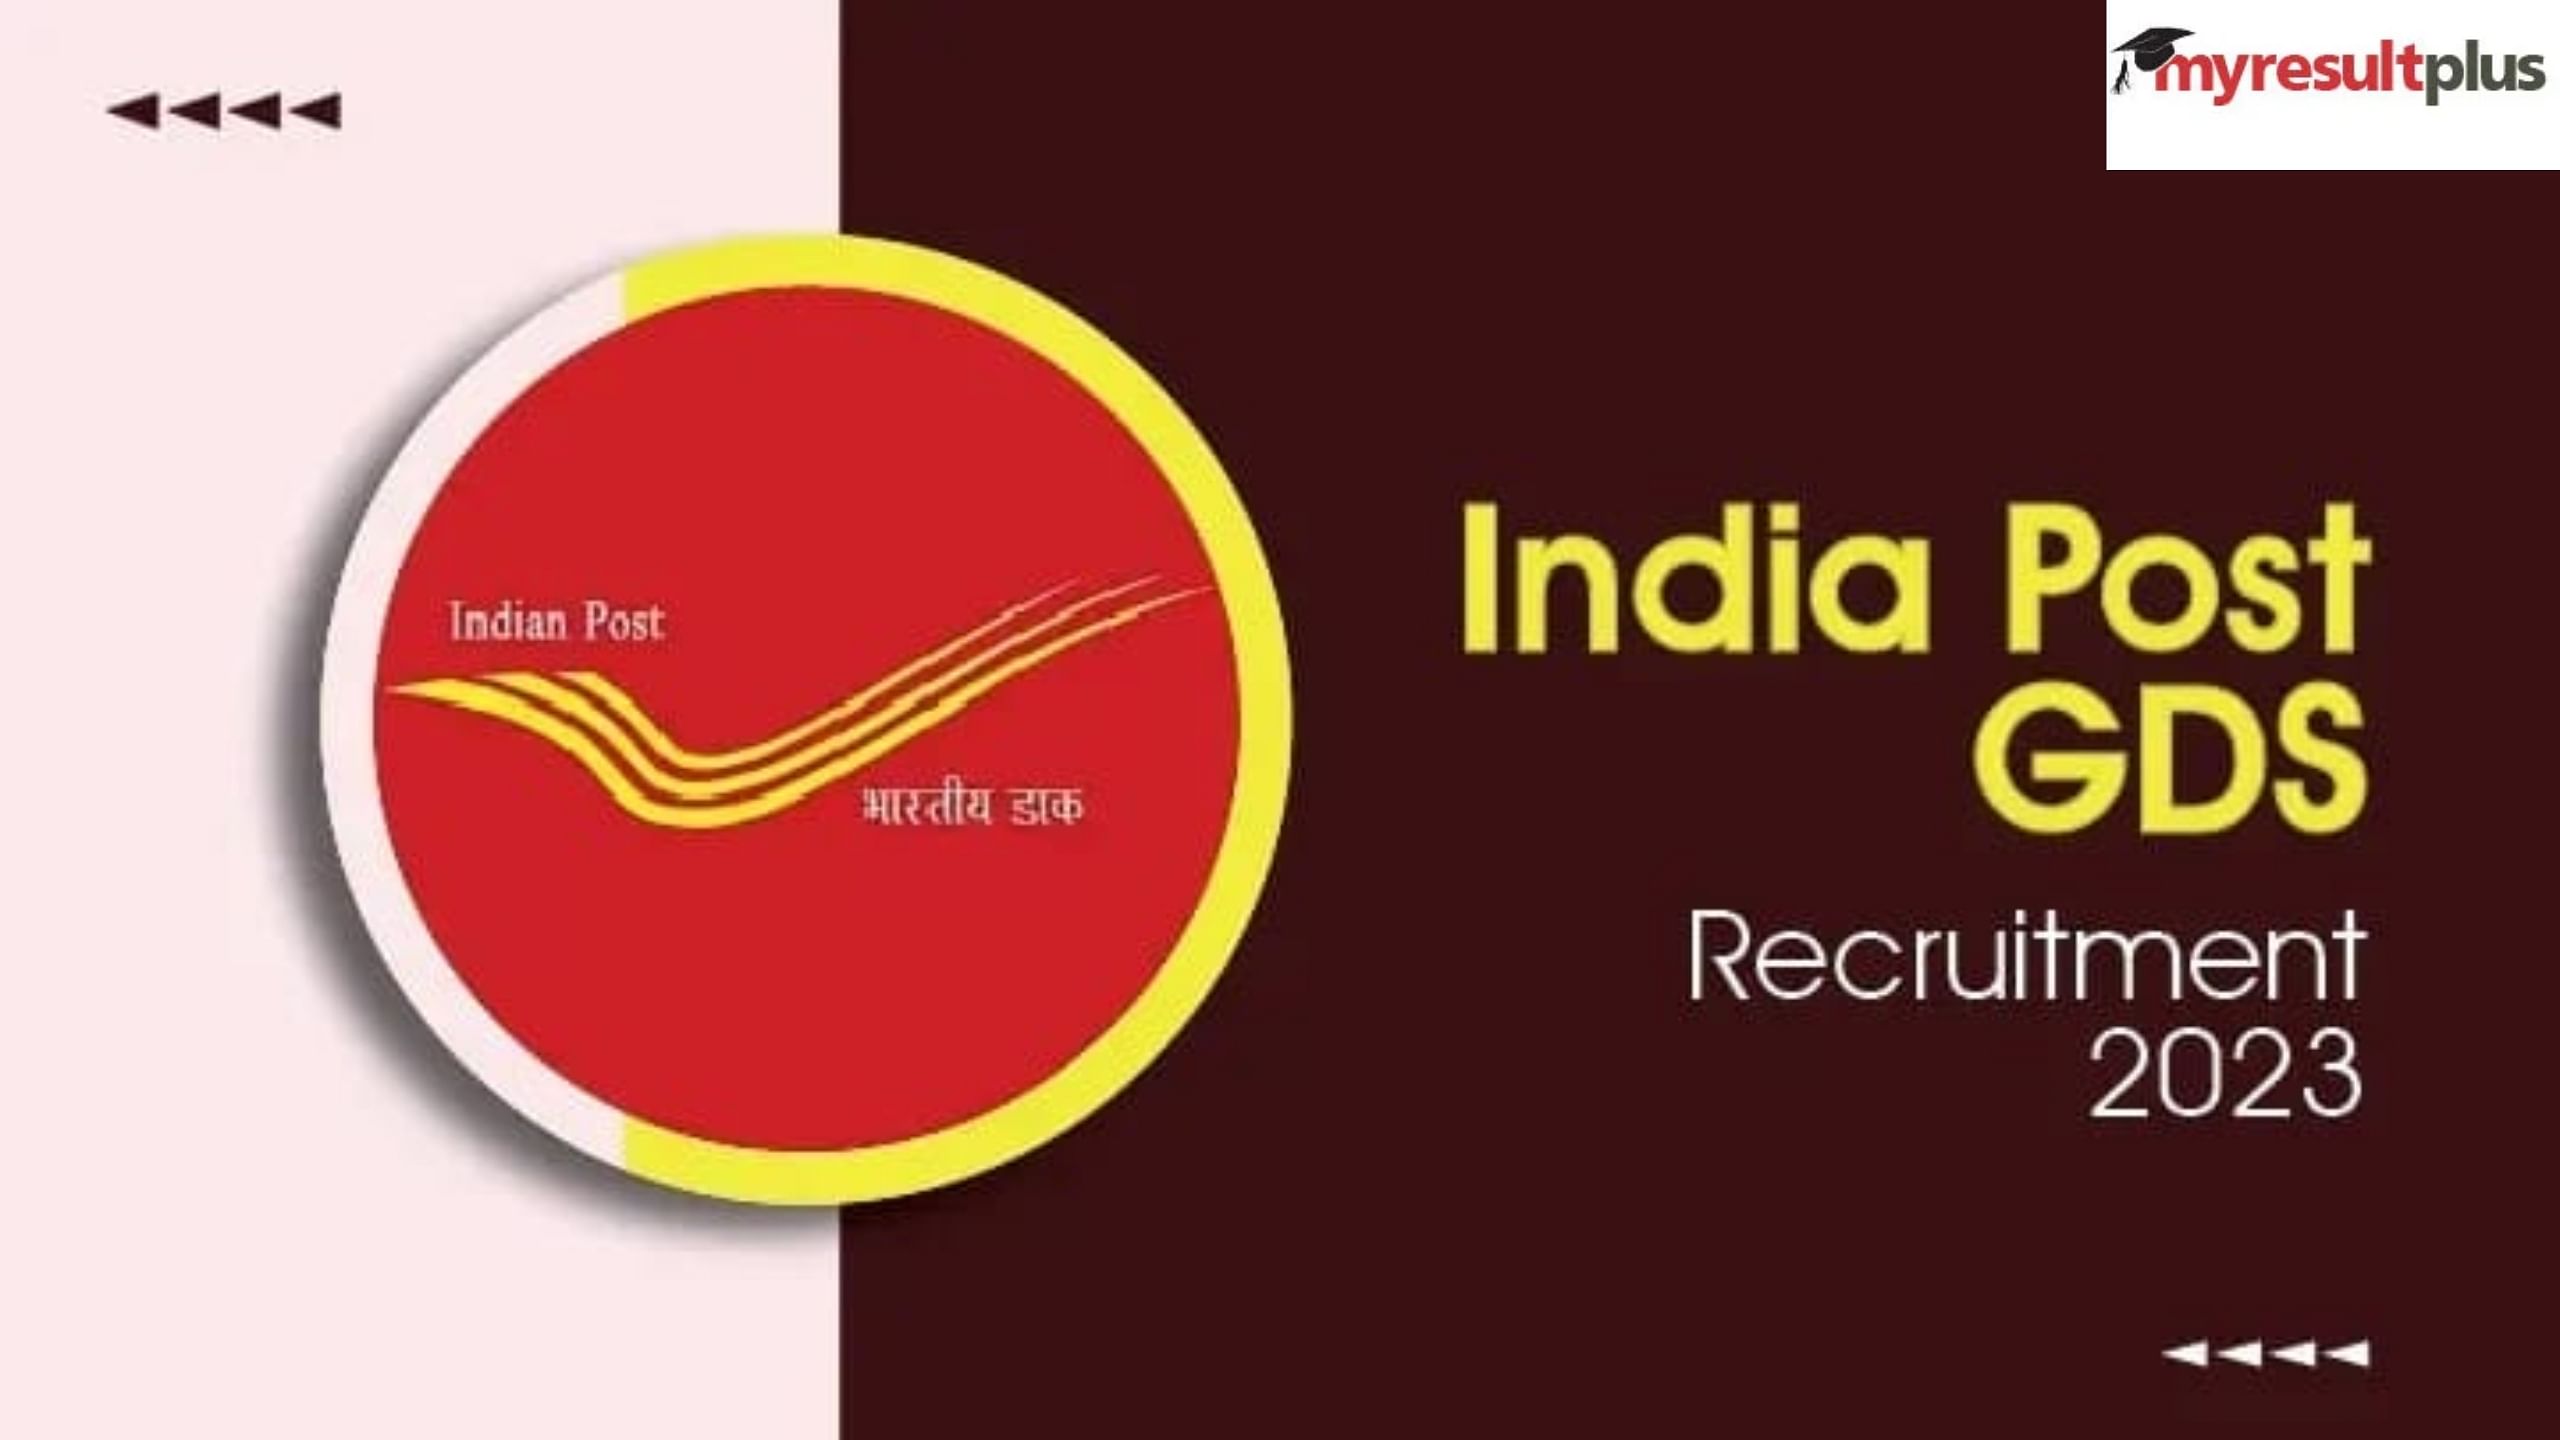 India Post GDS Recruitment 2023: Registration Starts for 30041 Posts, How to Apply